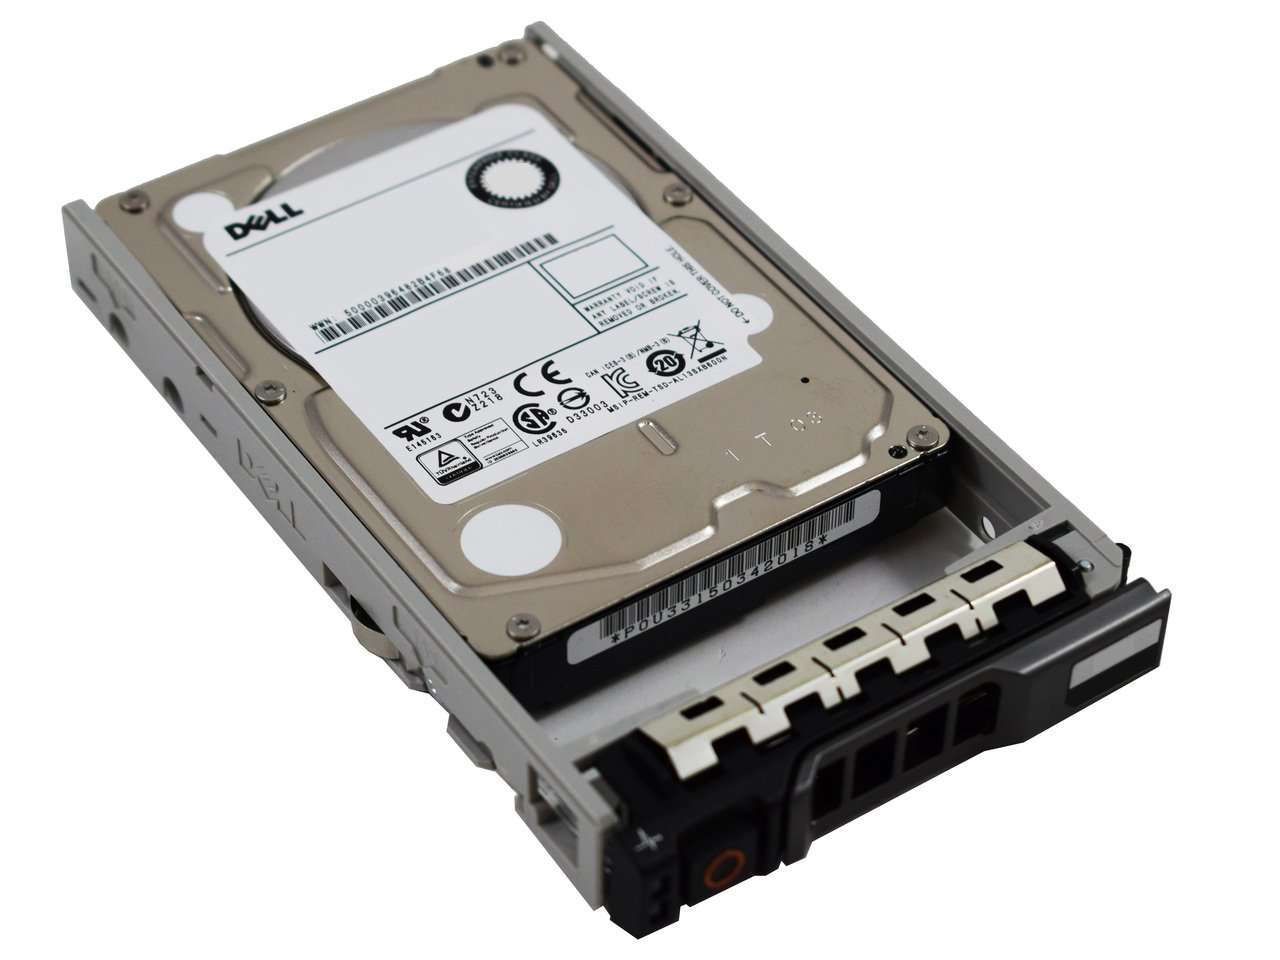 Dell G13 342-4623 600GB 10K RPM SAS 6Gb/s 512n 2.5" Manufacturer Recertified HDD